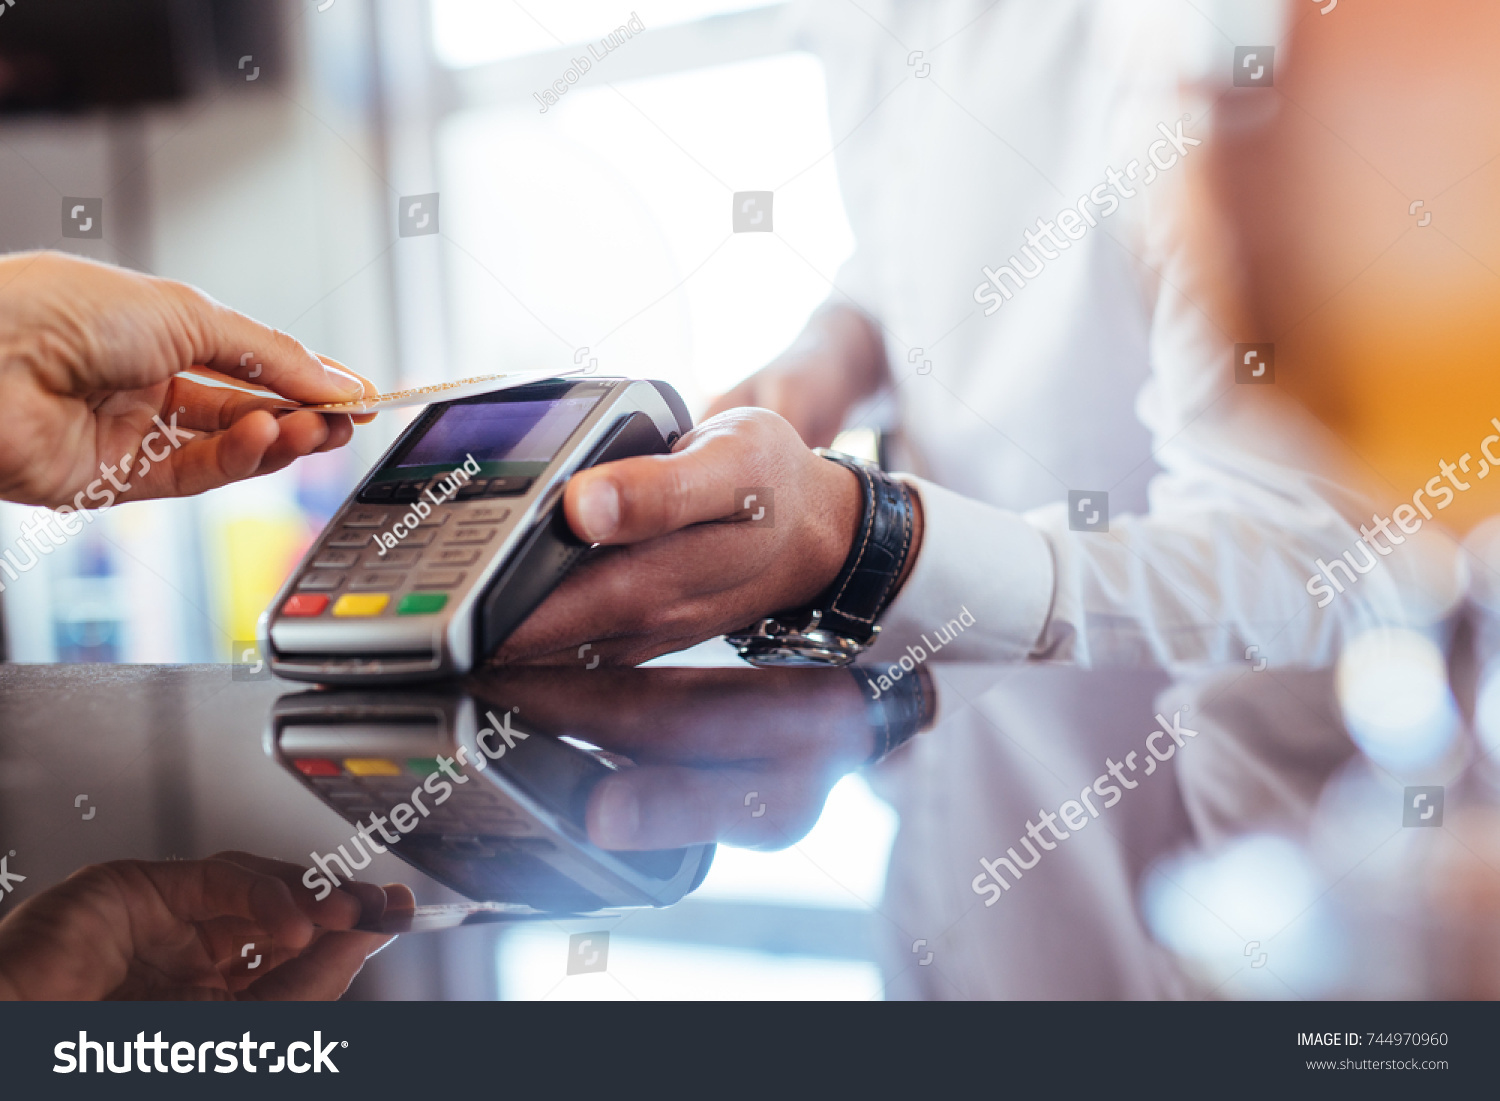 Hand of customer paying with contactless credit card with NFC technology. Bartender with a credit card reader machine at bar counter with female holding credit card. Focus on hands. #744970960